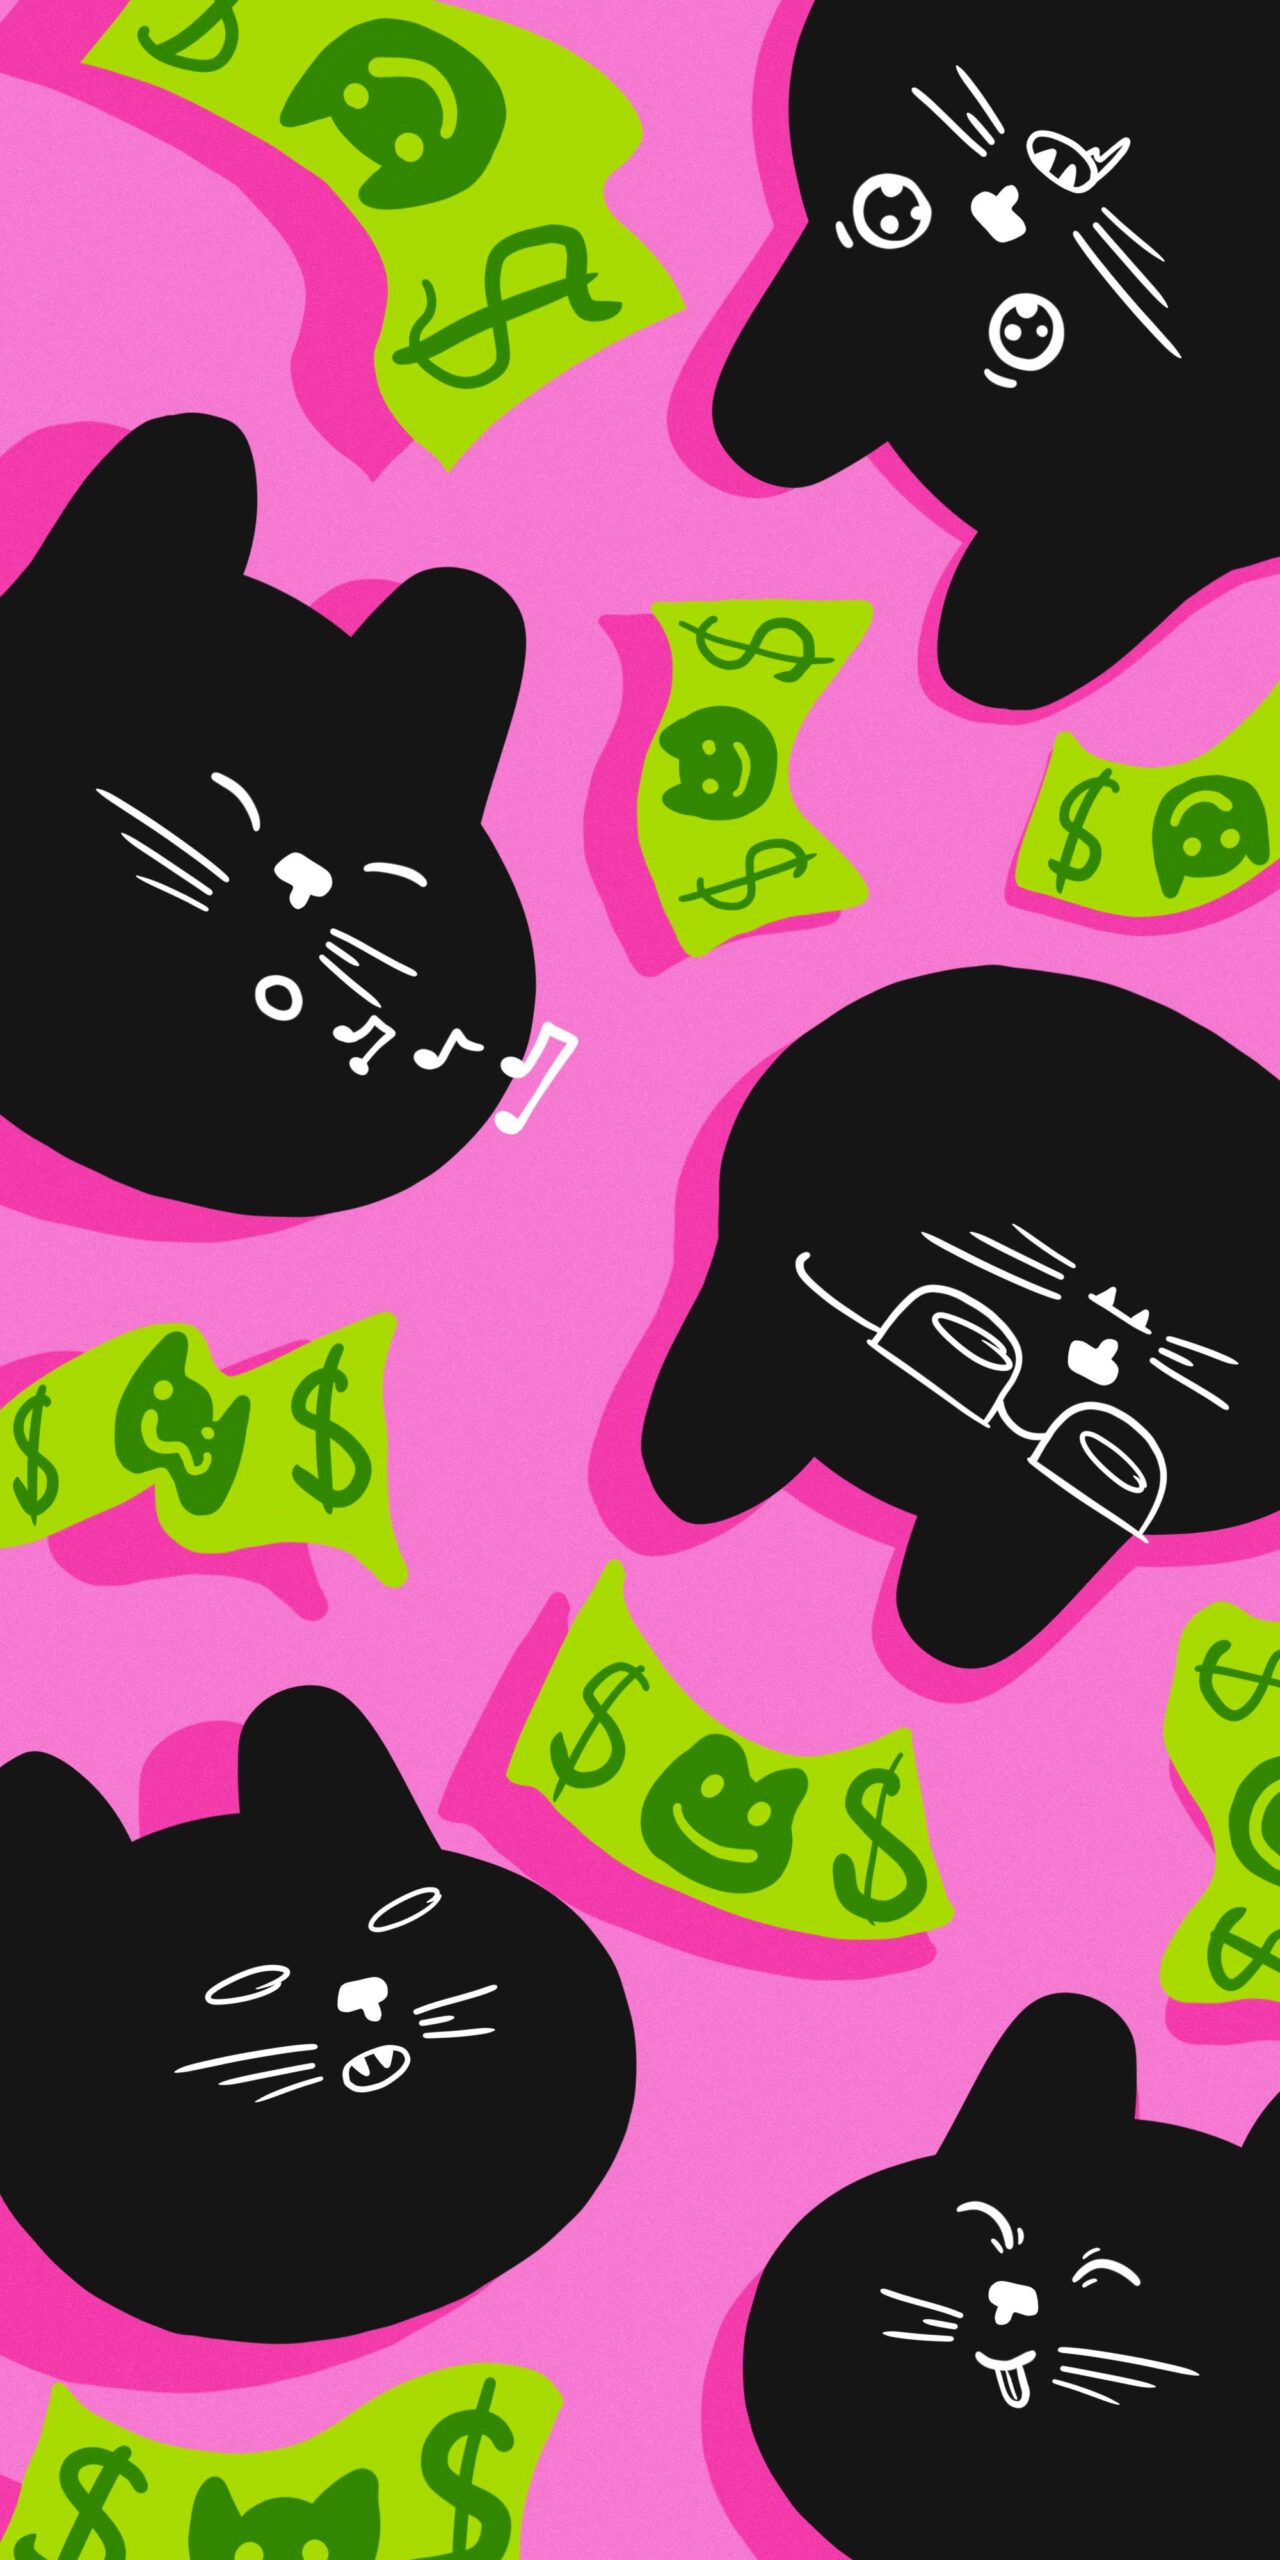 A pink background with black cats and green money signs. - Money